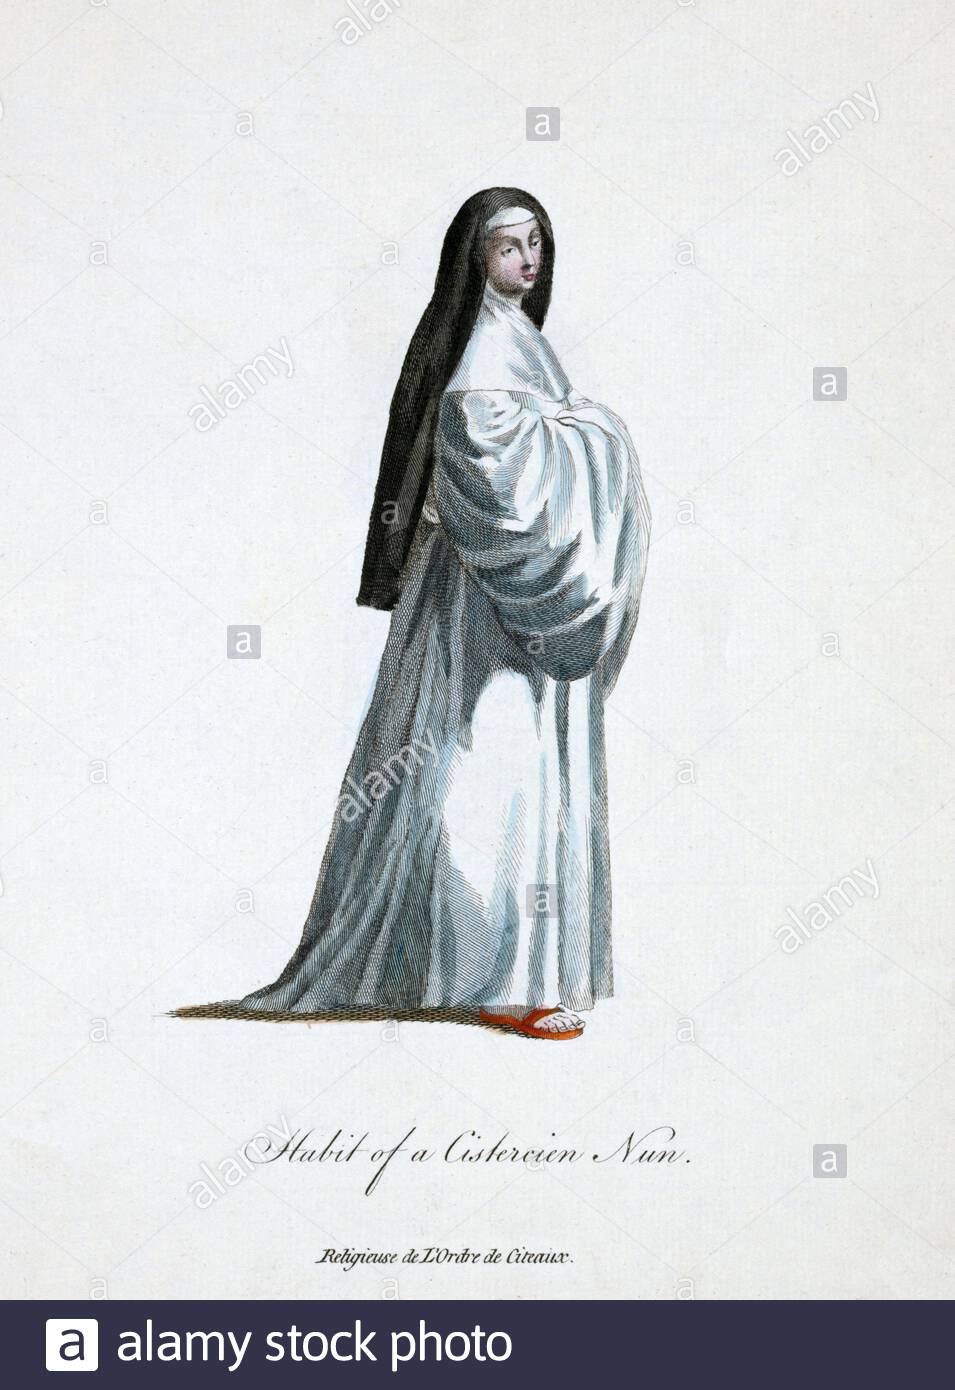 Habit of a Cistercian Nun, vintage illustration from the 1700s Stock Photo